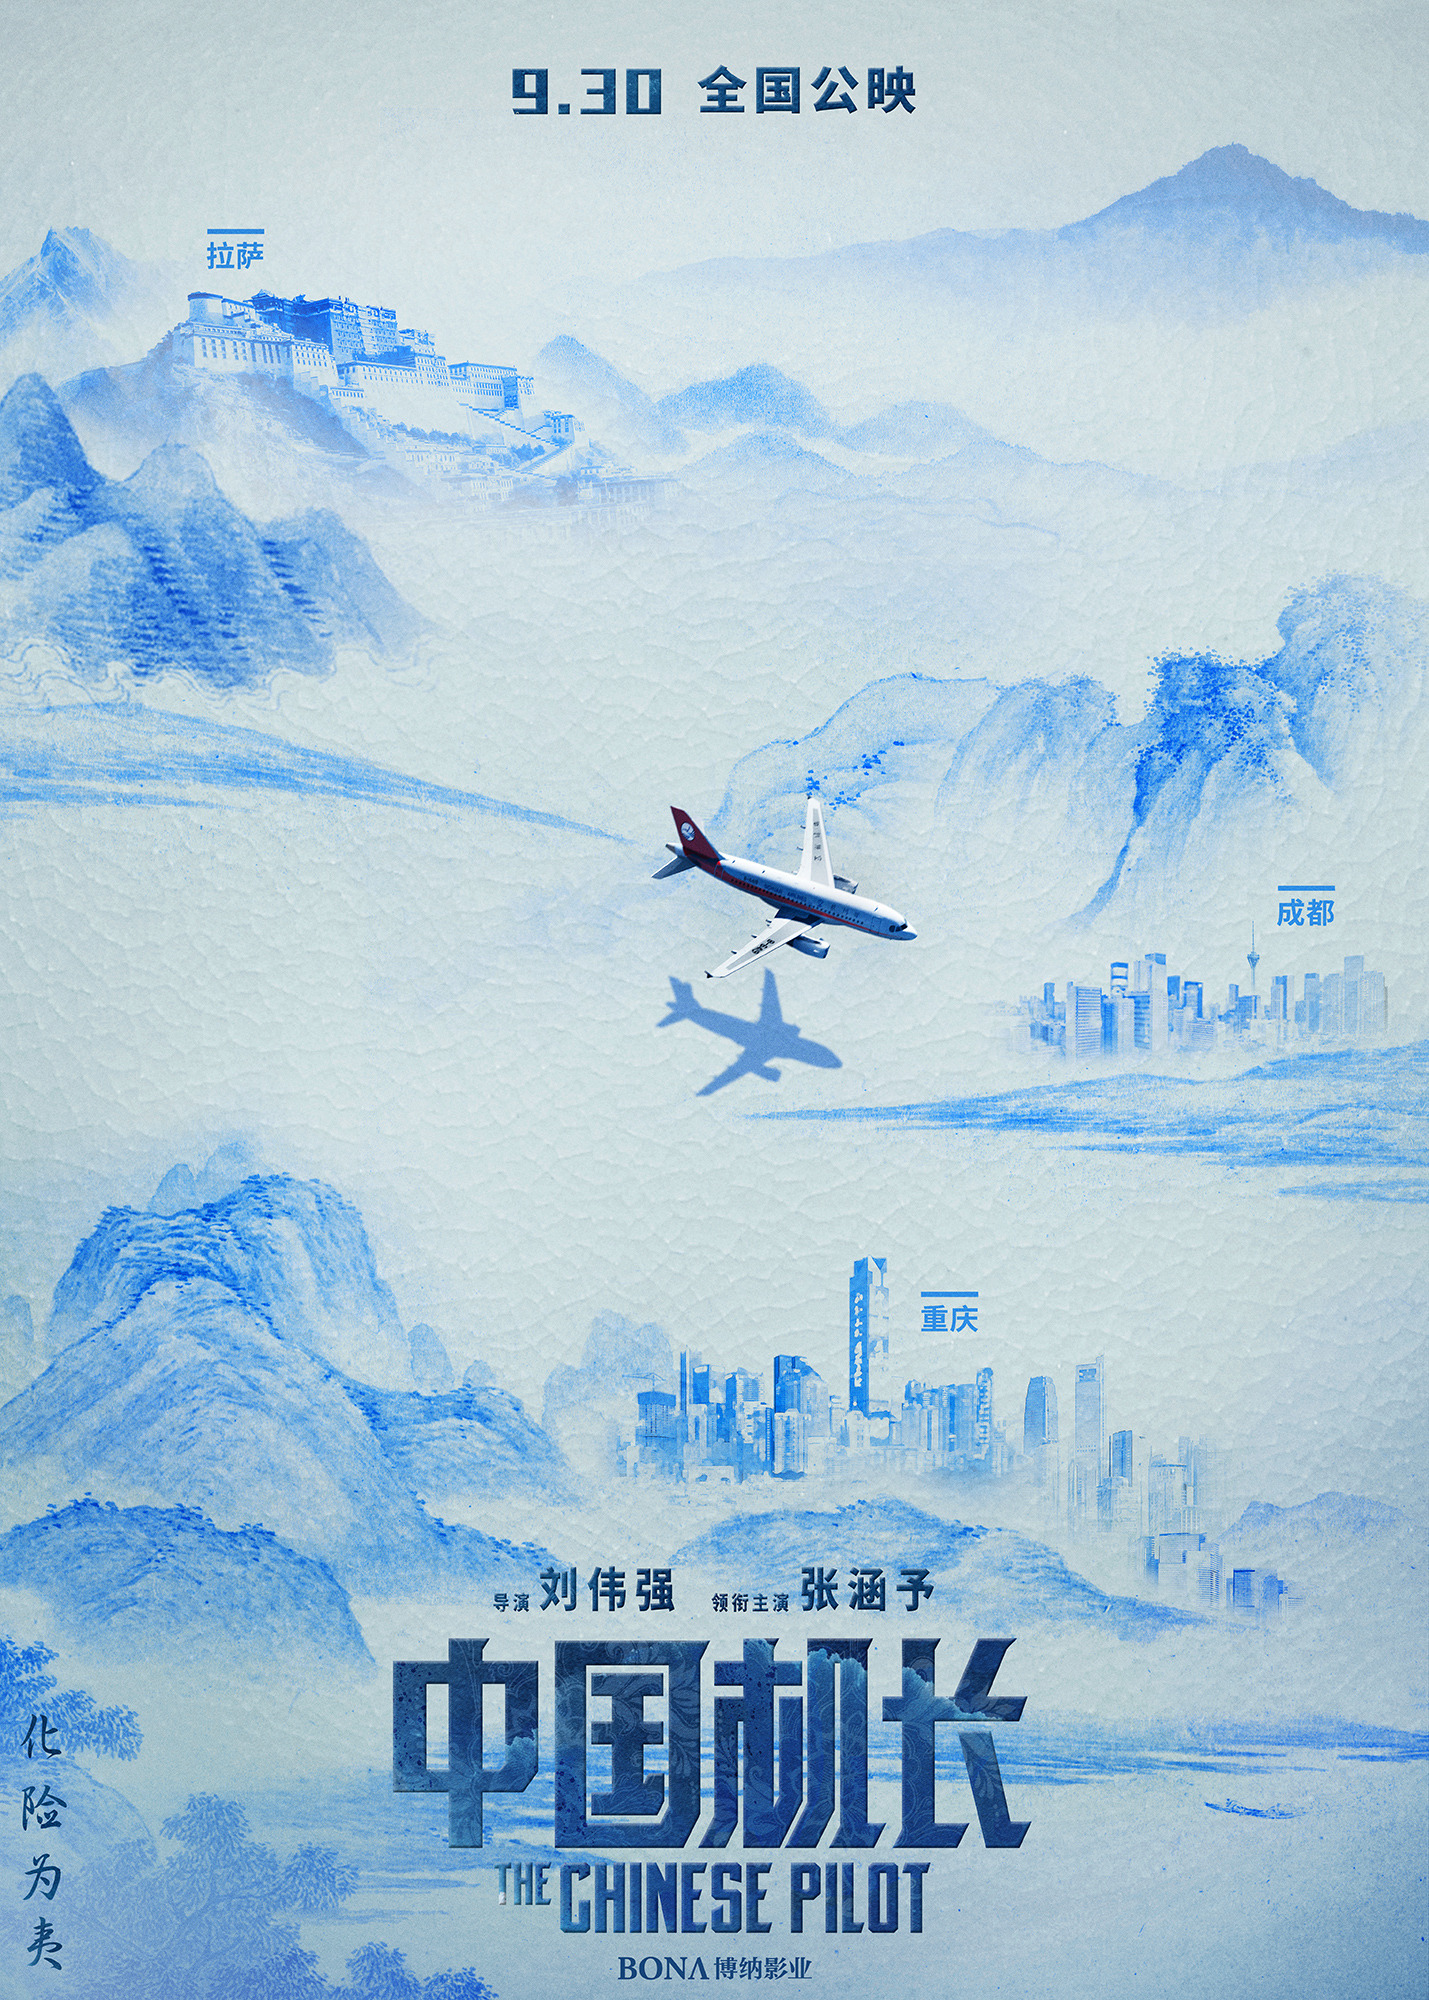 Mega Sized Movie Poster Image for The Chinese Pilot (#14 of 17)